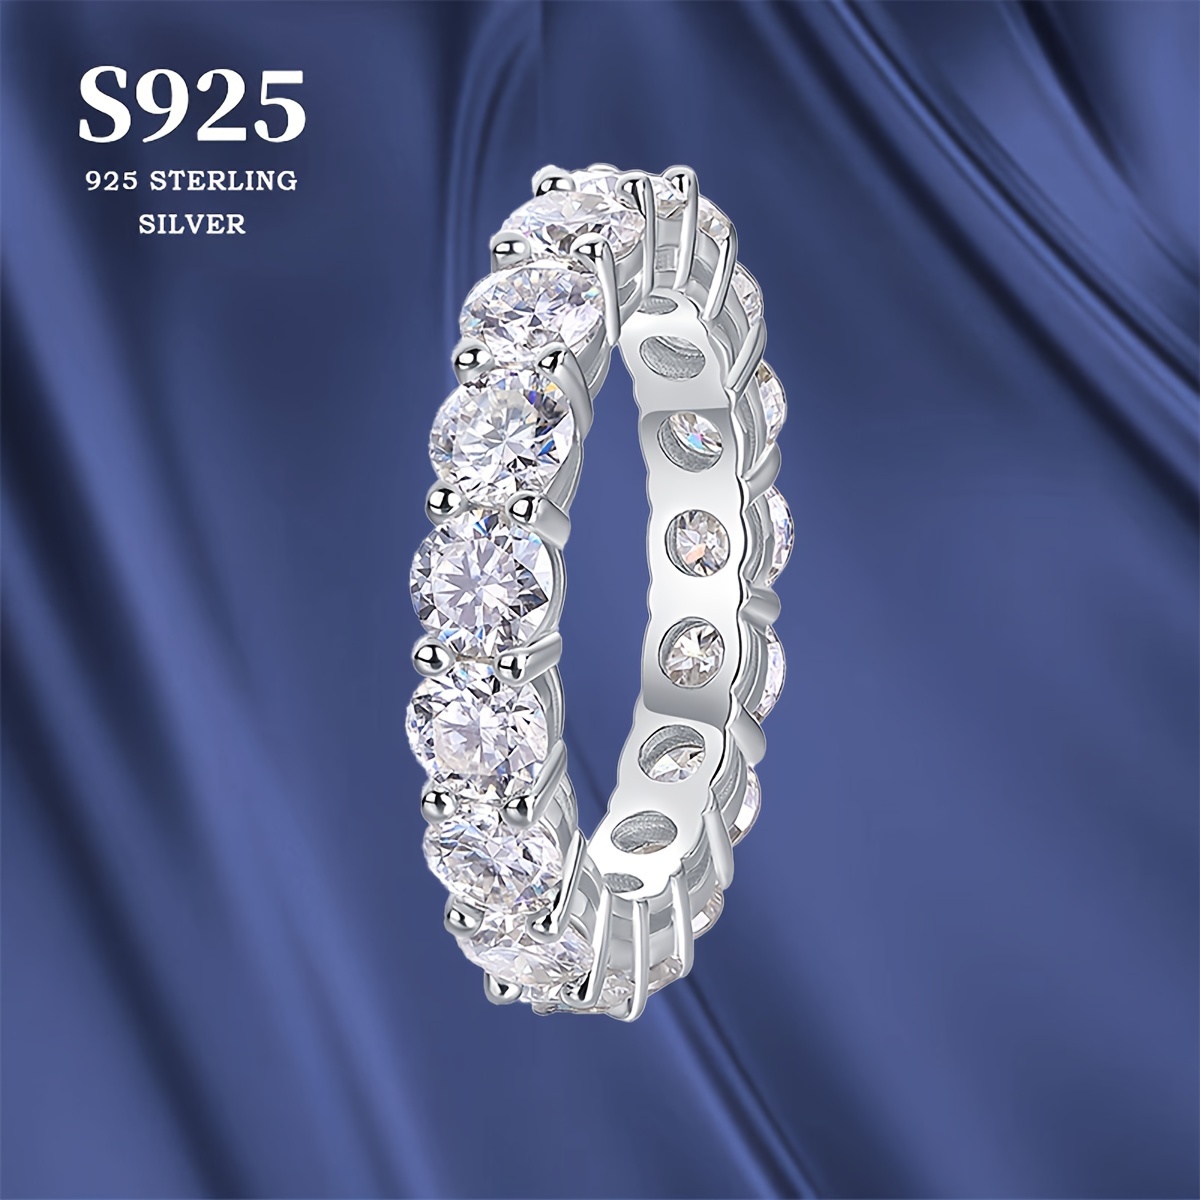 

1pc Eternity Ring, 3 Carat Moissanite Ring, S925 Silver Plated Men's Women's Gifts, Family, Friends, Mother's Day Event Jewelry, Daily Wear, Fashion And Elegance